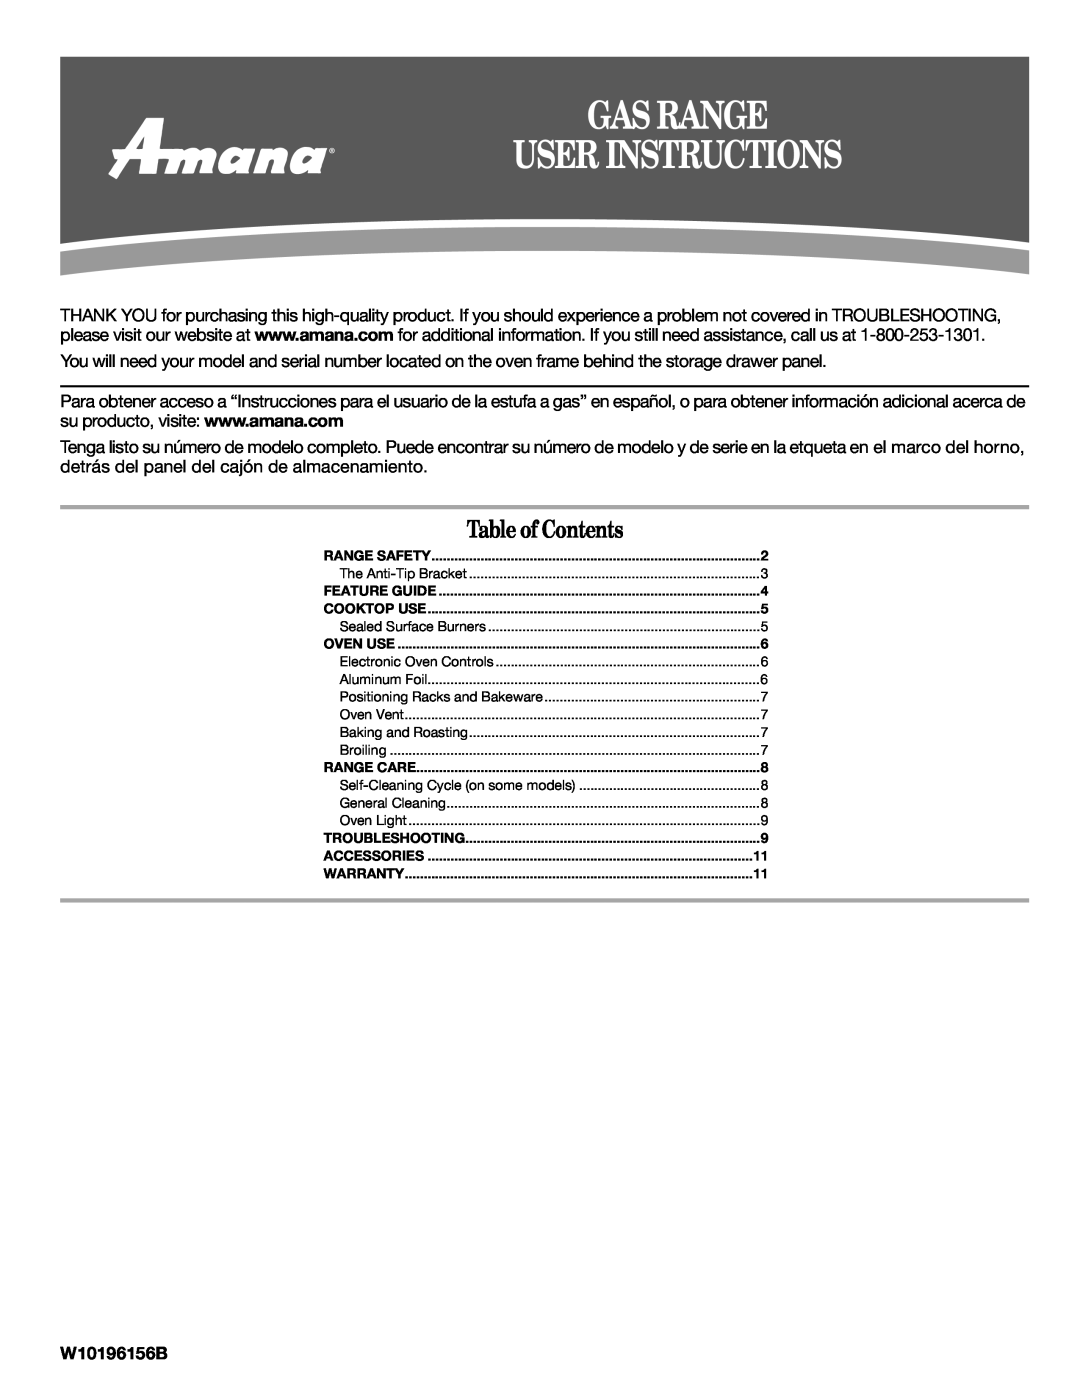 Amana W10196156B warranty Gas Range User Instructions, Table of Contents 